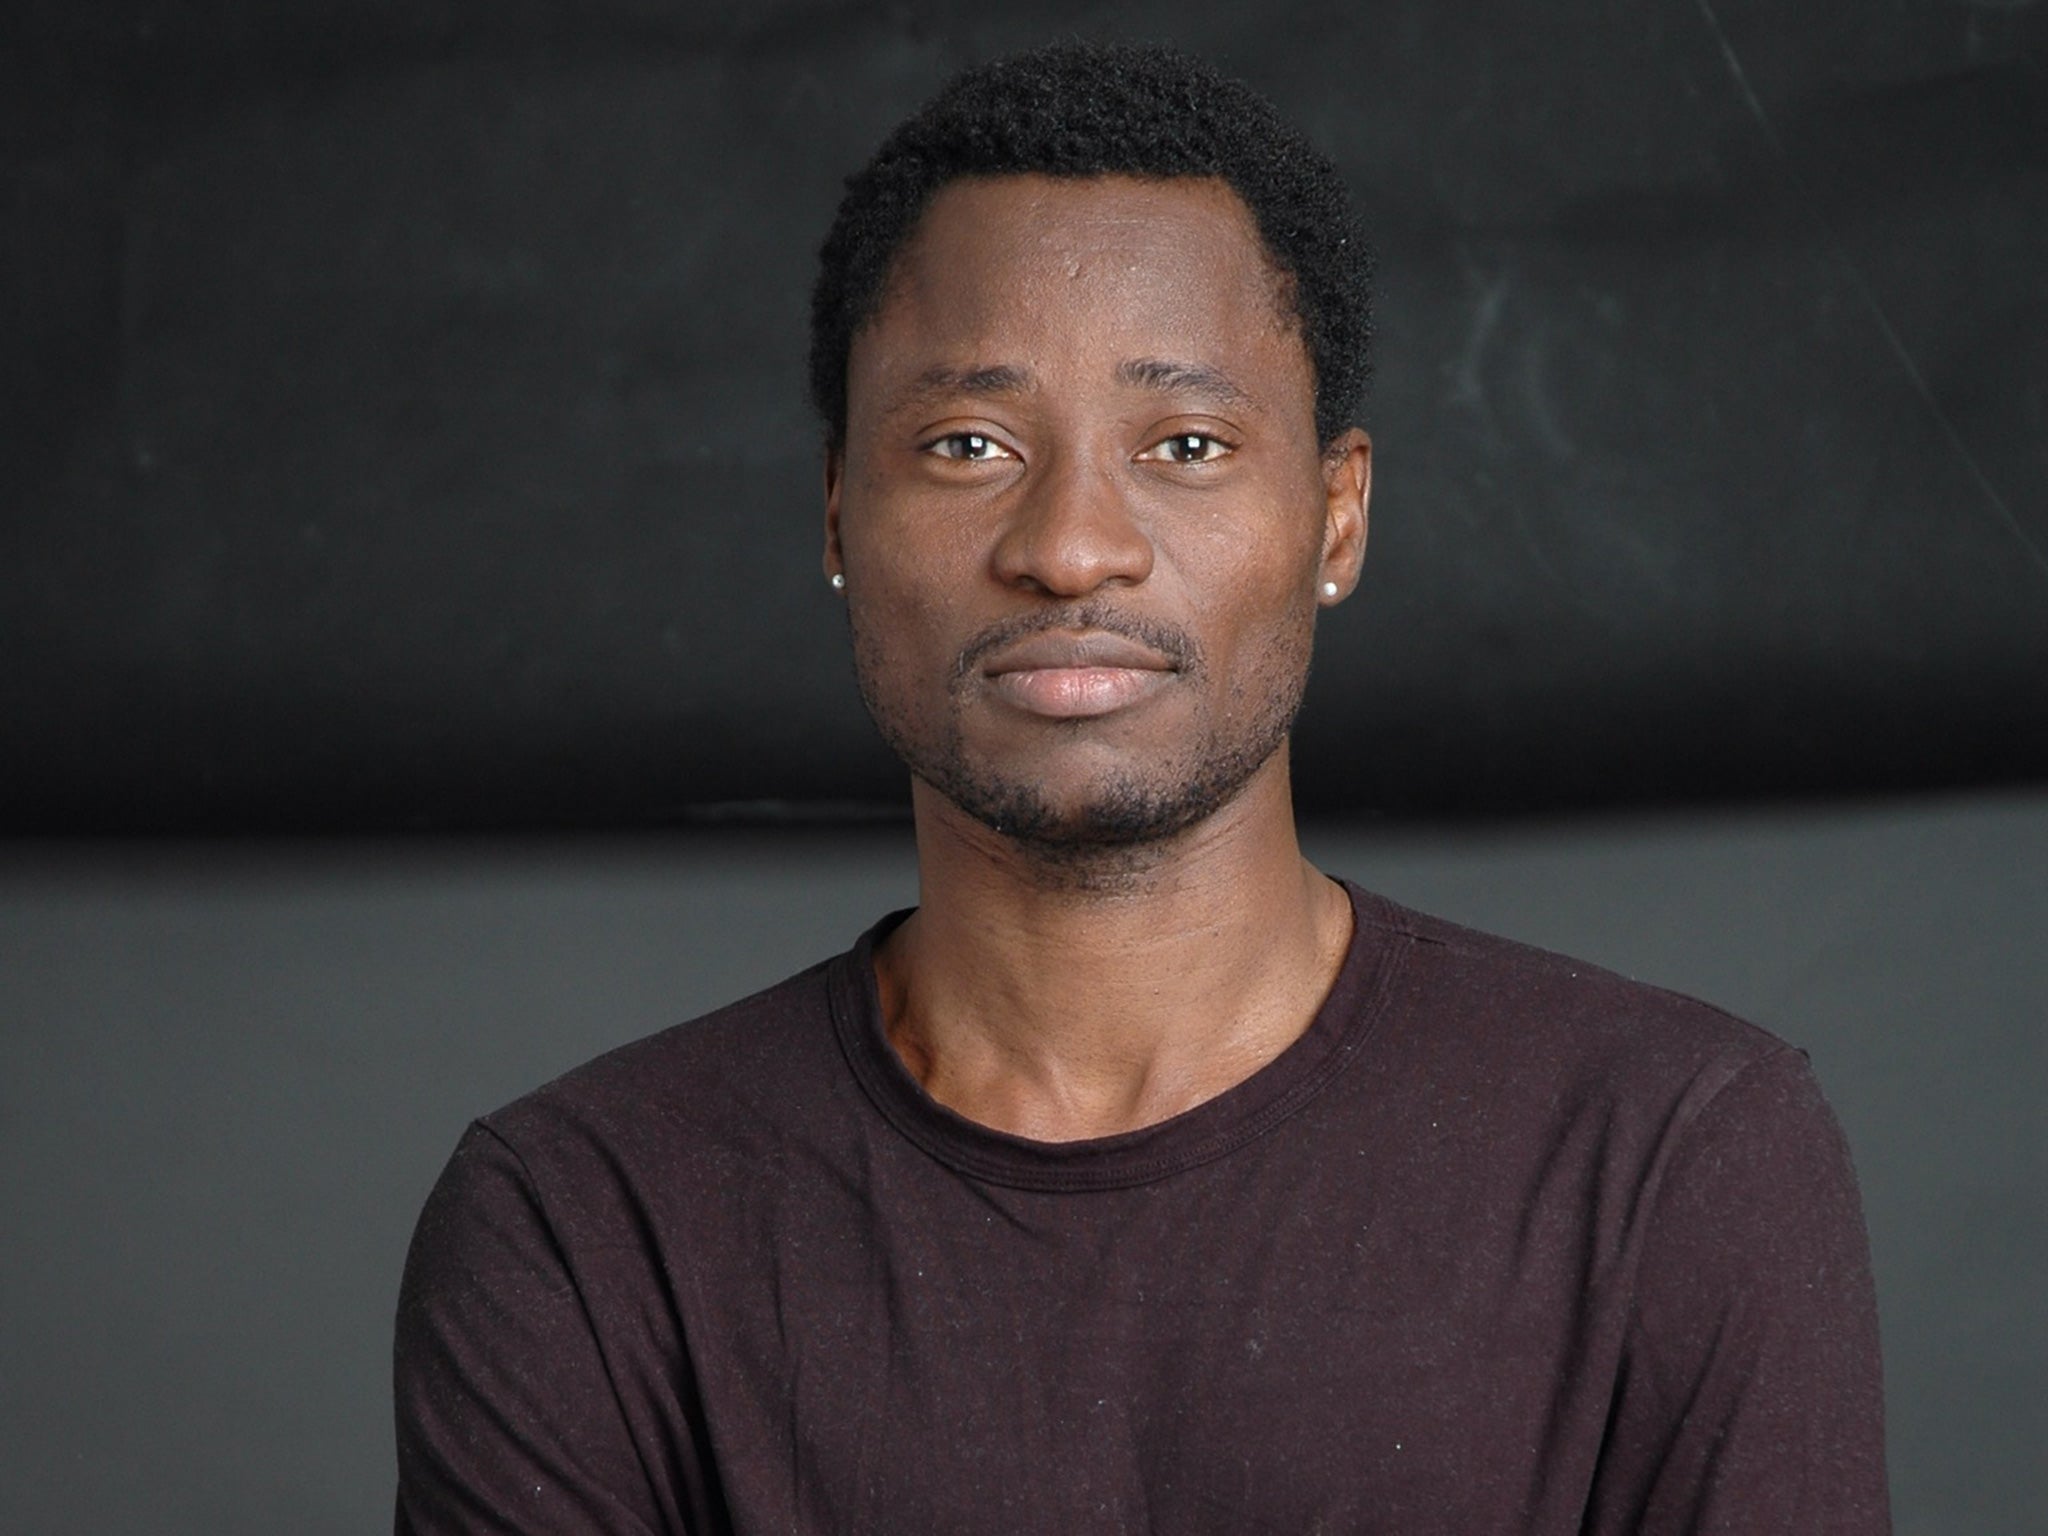 Bisi Alimi, who has HIV, came to the UK from Nigeria in 2007 after being outed as gay